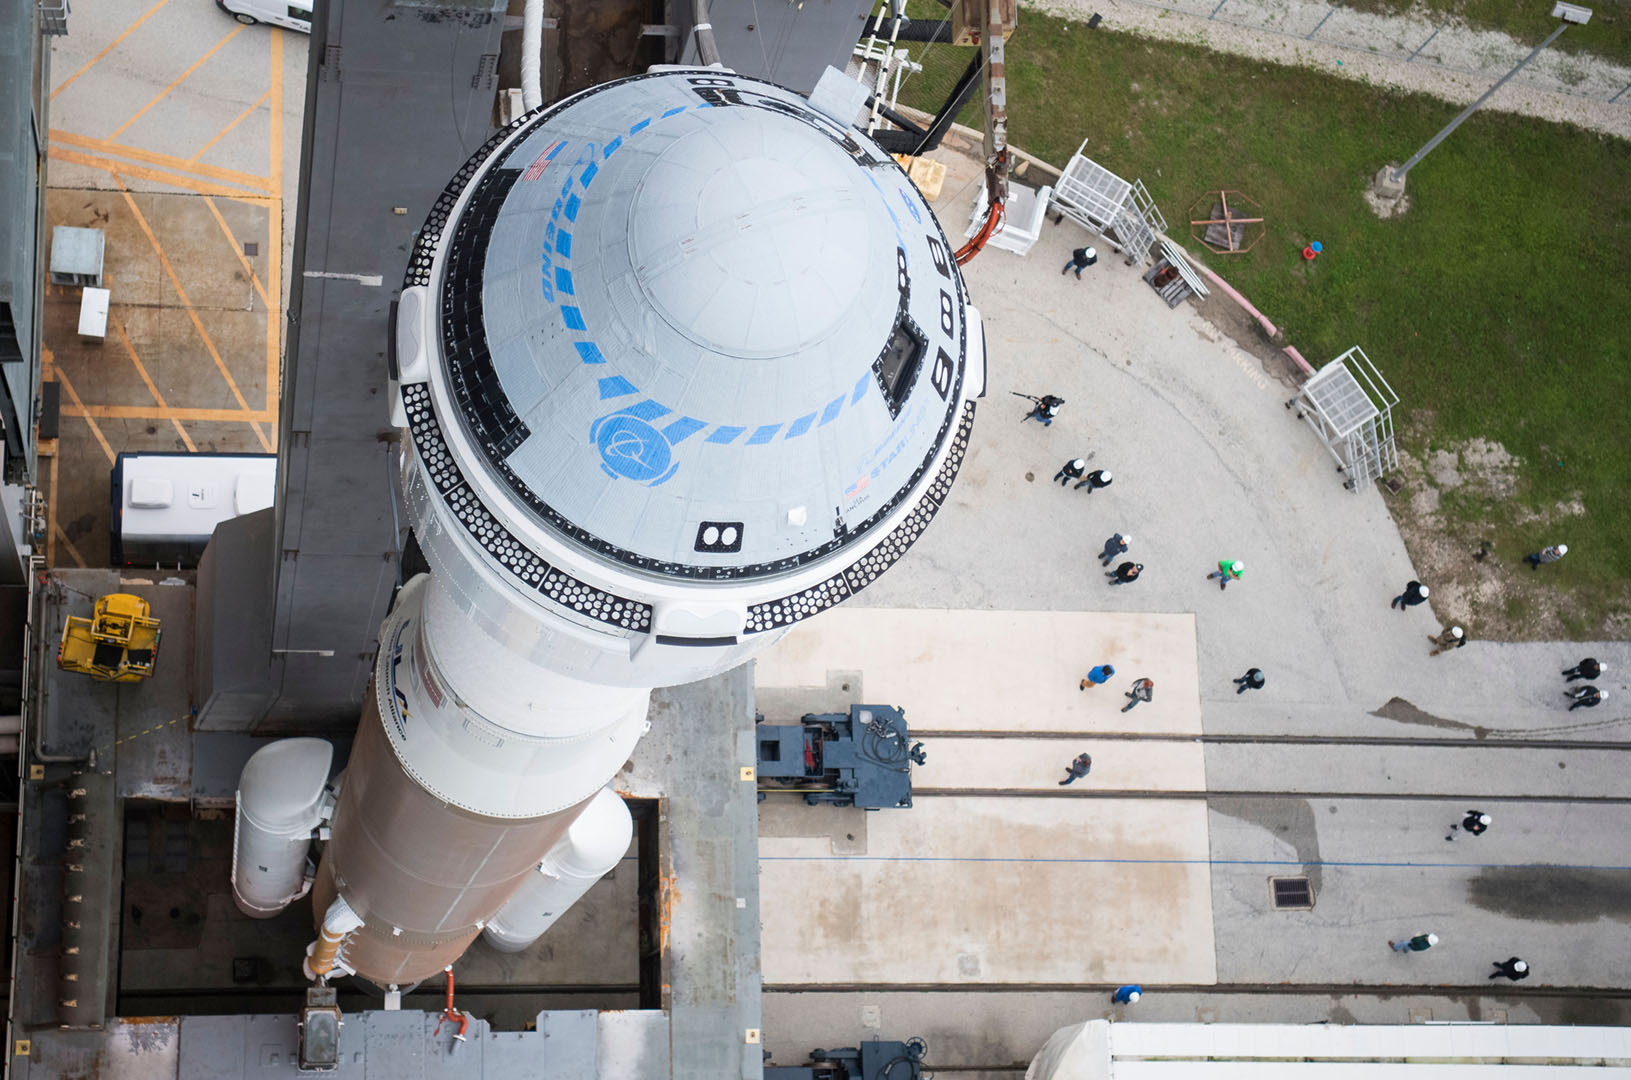 A birdseye view of Boeing's Starliner spacecraft at the launch pad in Florida.